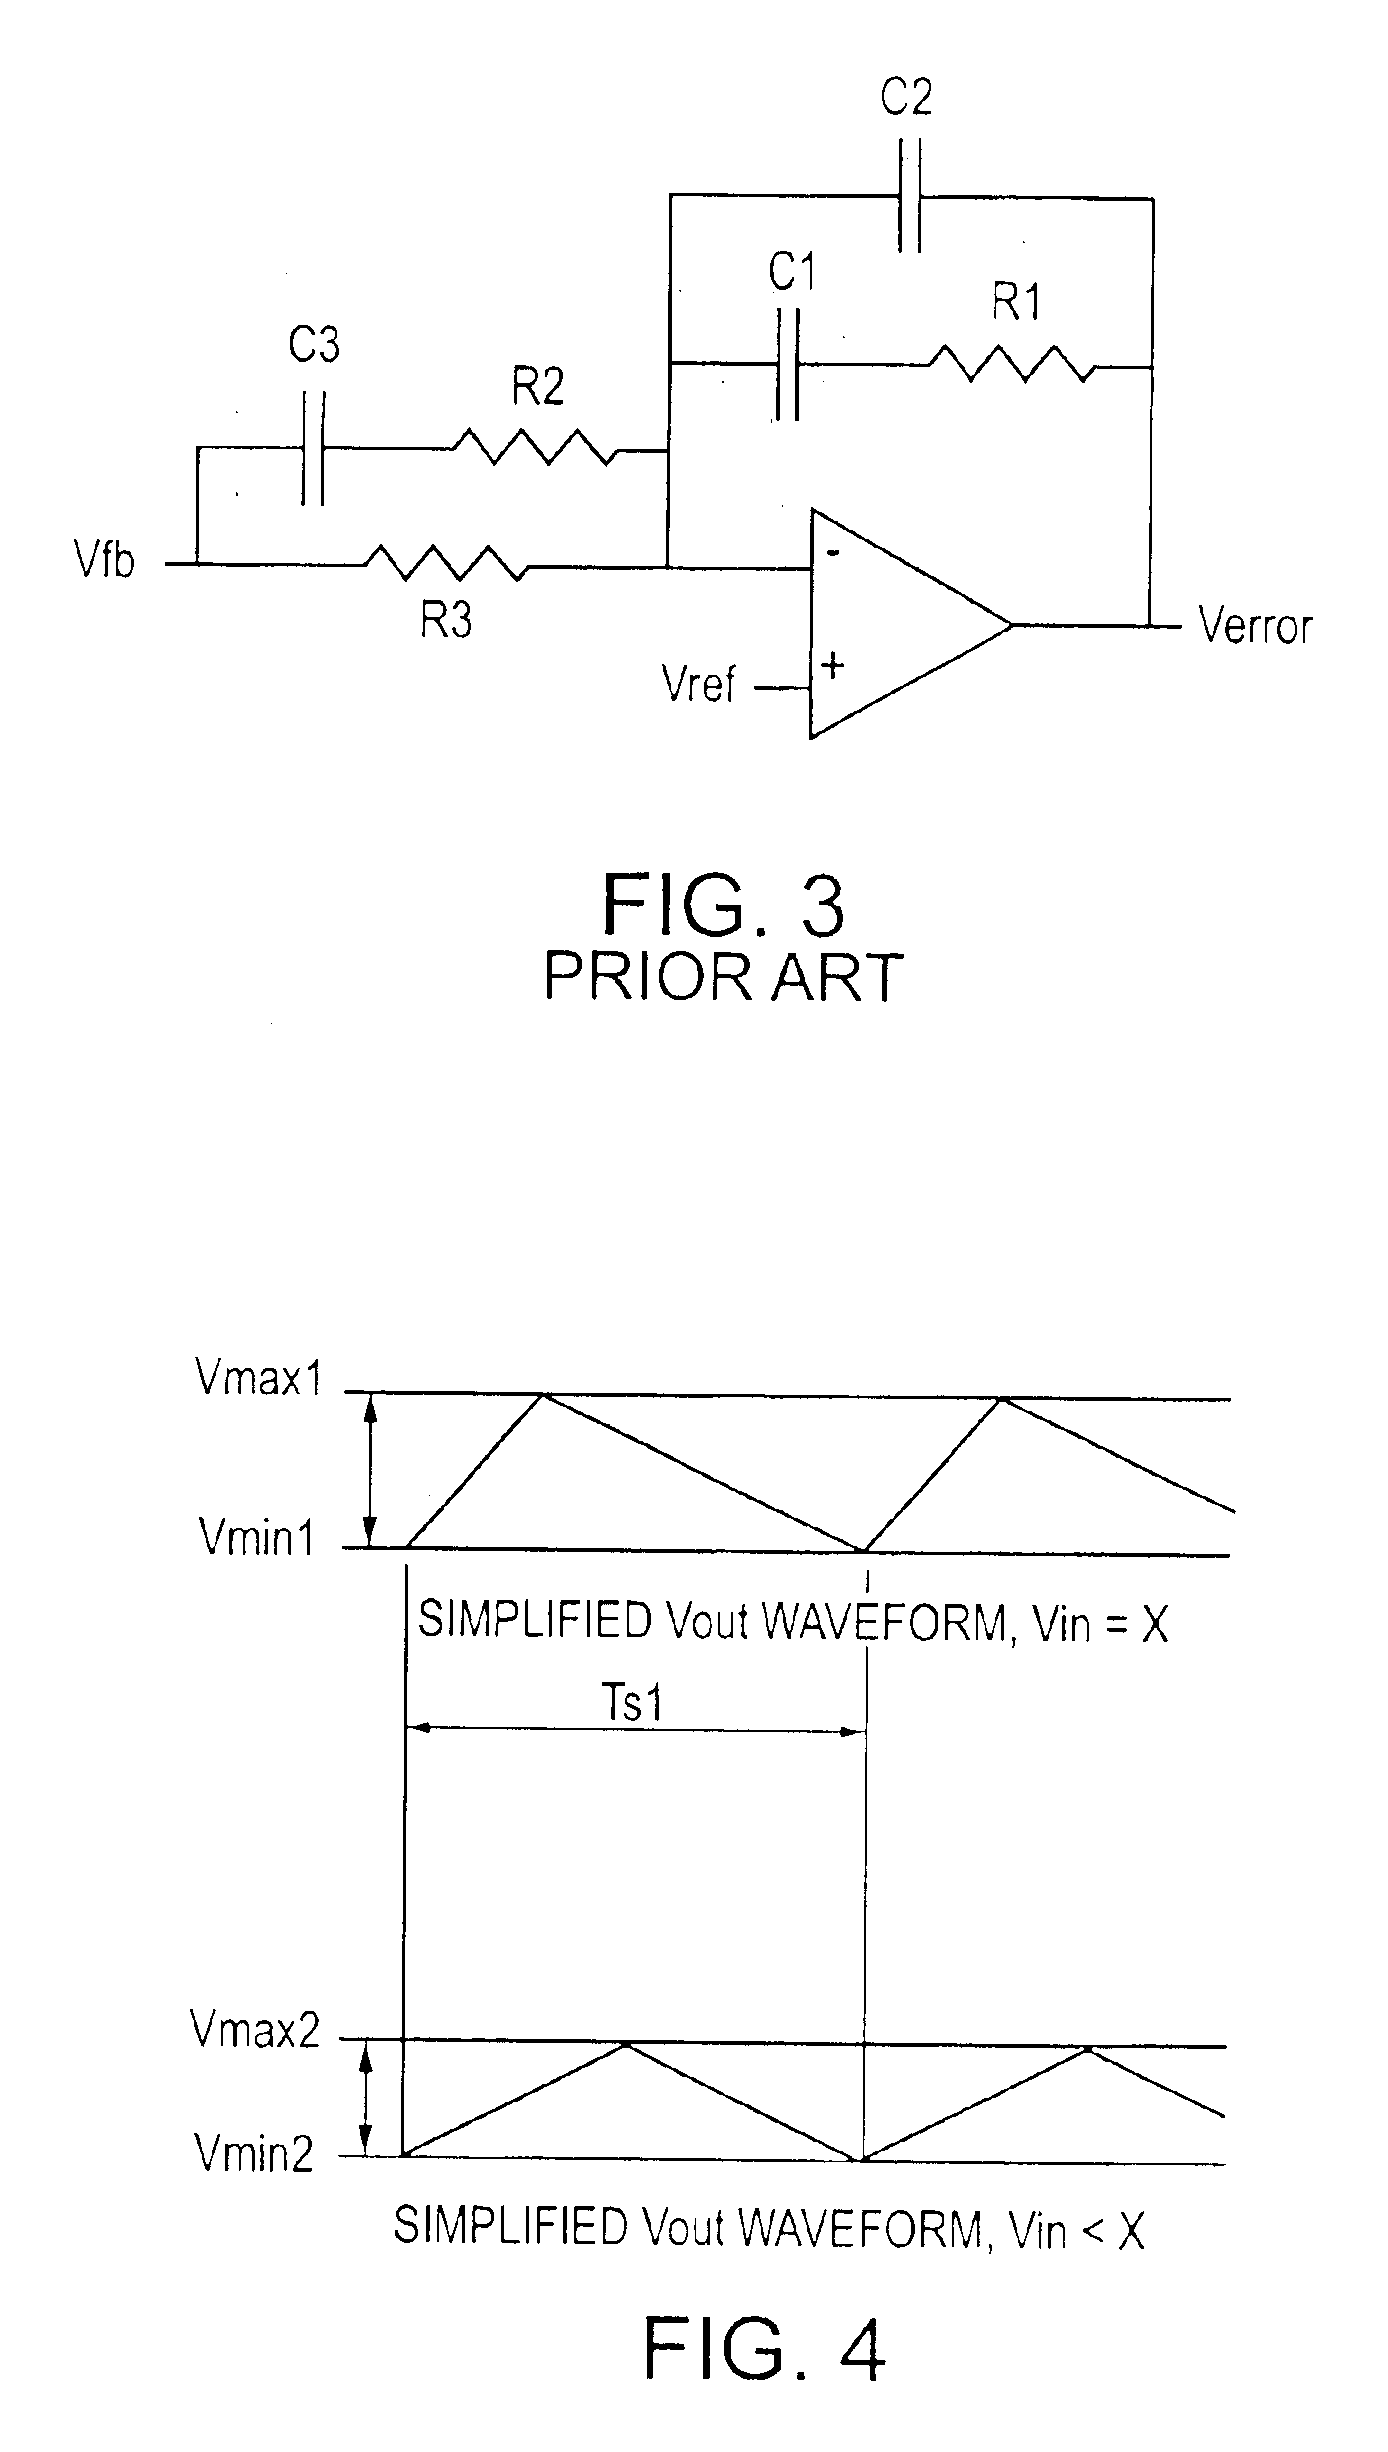 Fixed frequency hysteretic regulator